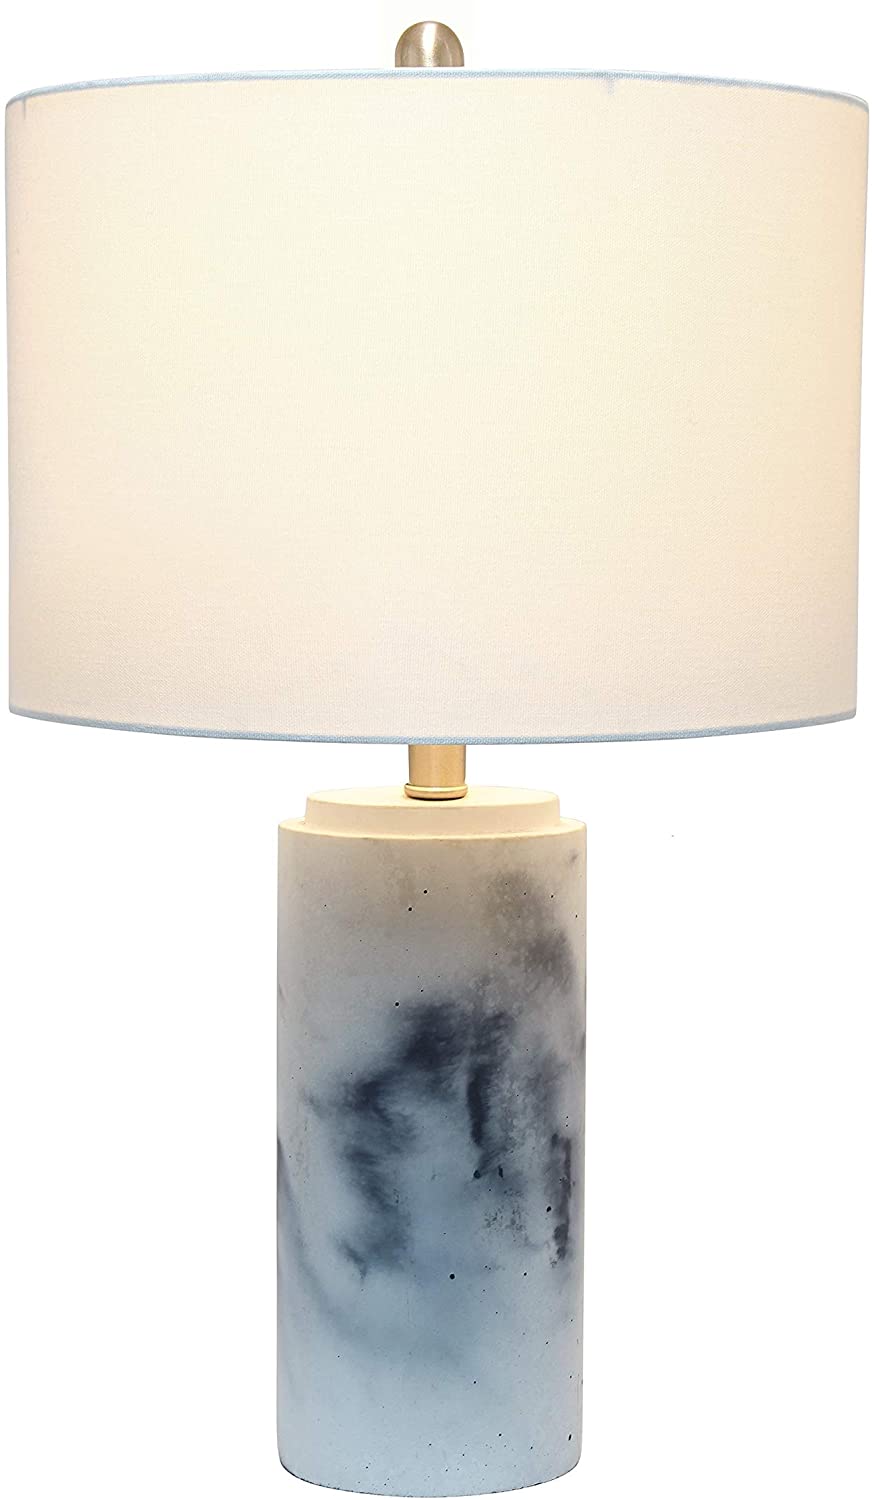 Home Marbleized Table Lamp White Fabric Shade Modern Contemporary